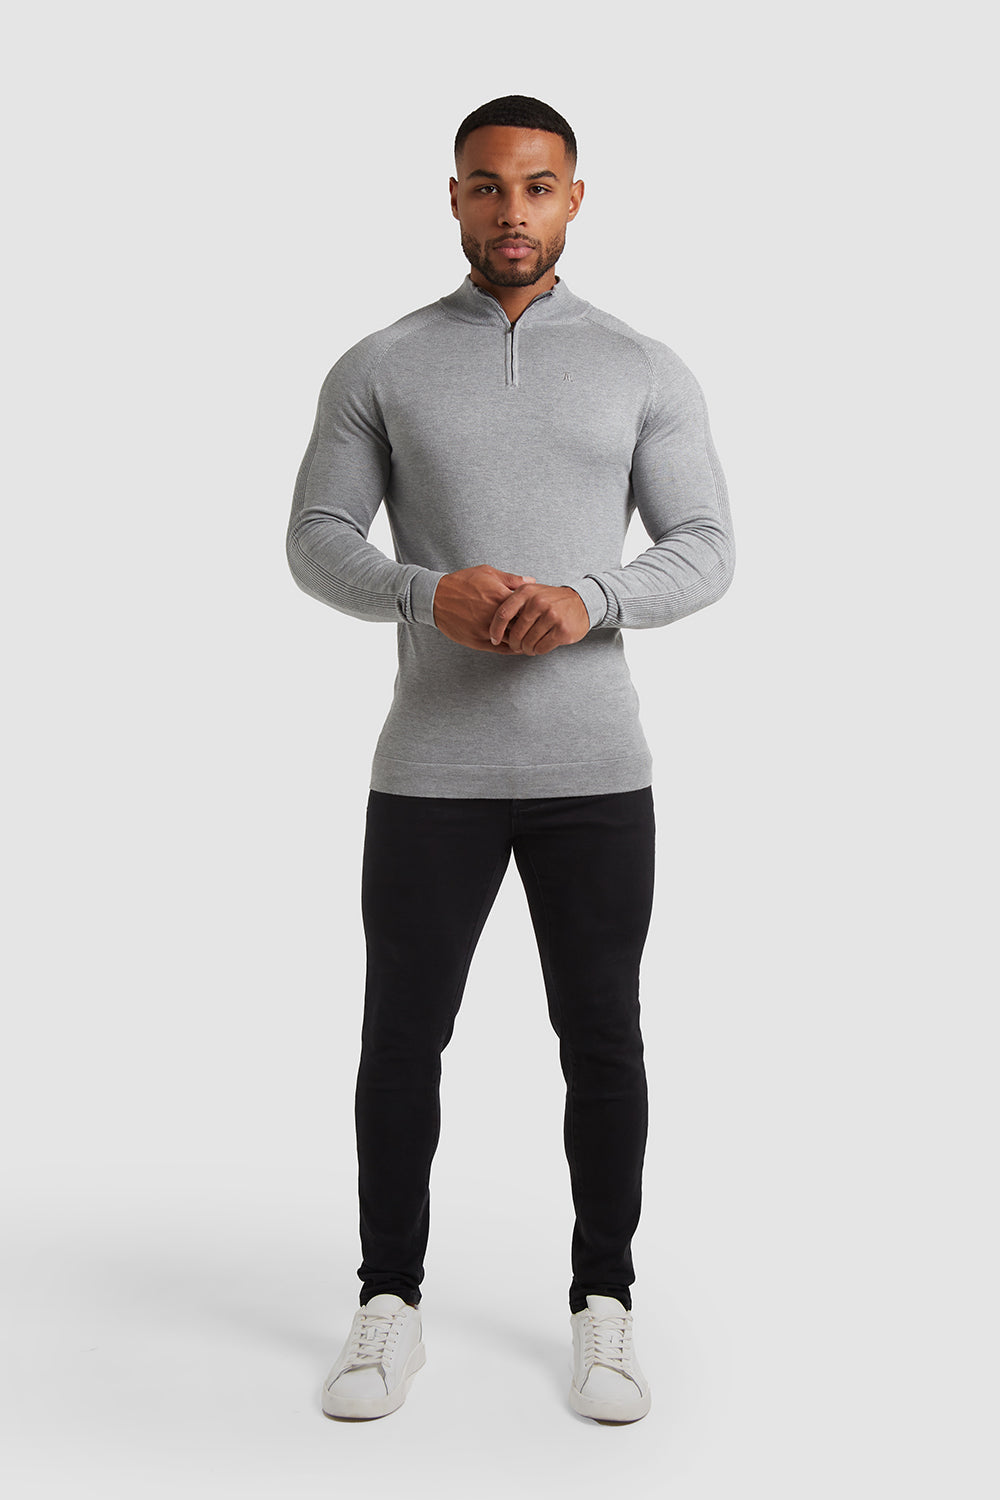 Placement Rib Half Zip Neck Long Sleeve in Light Grey Marl - TAILORED ...